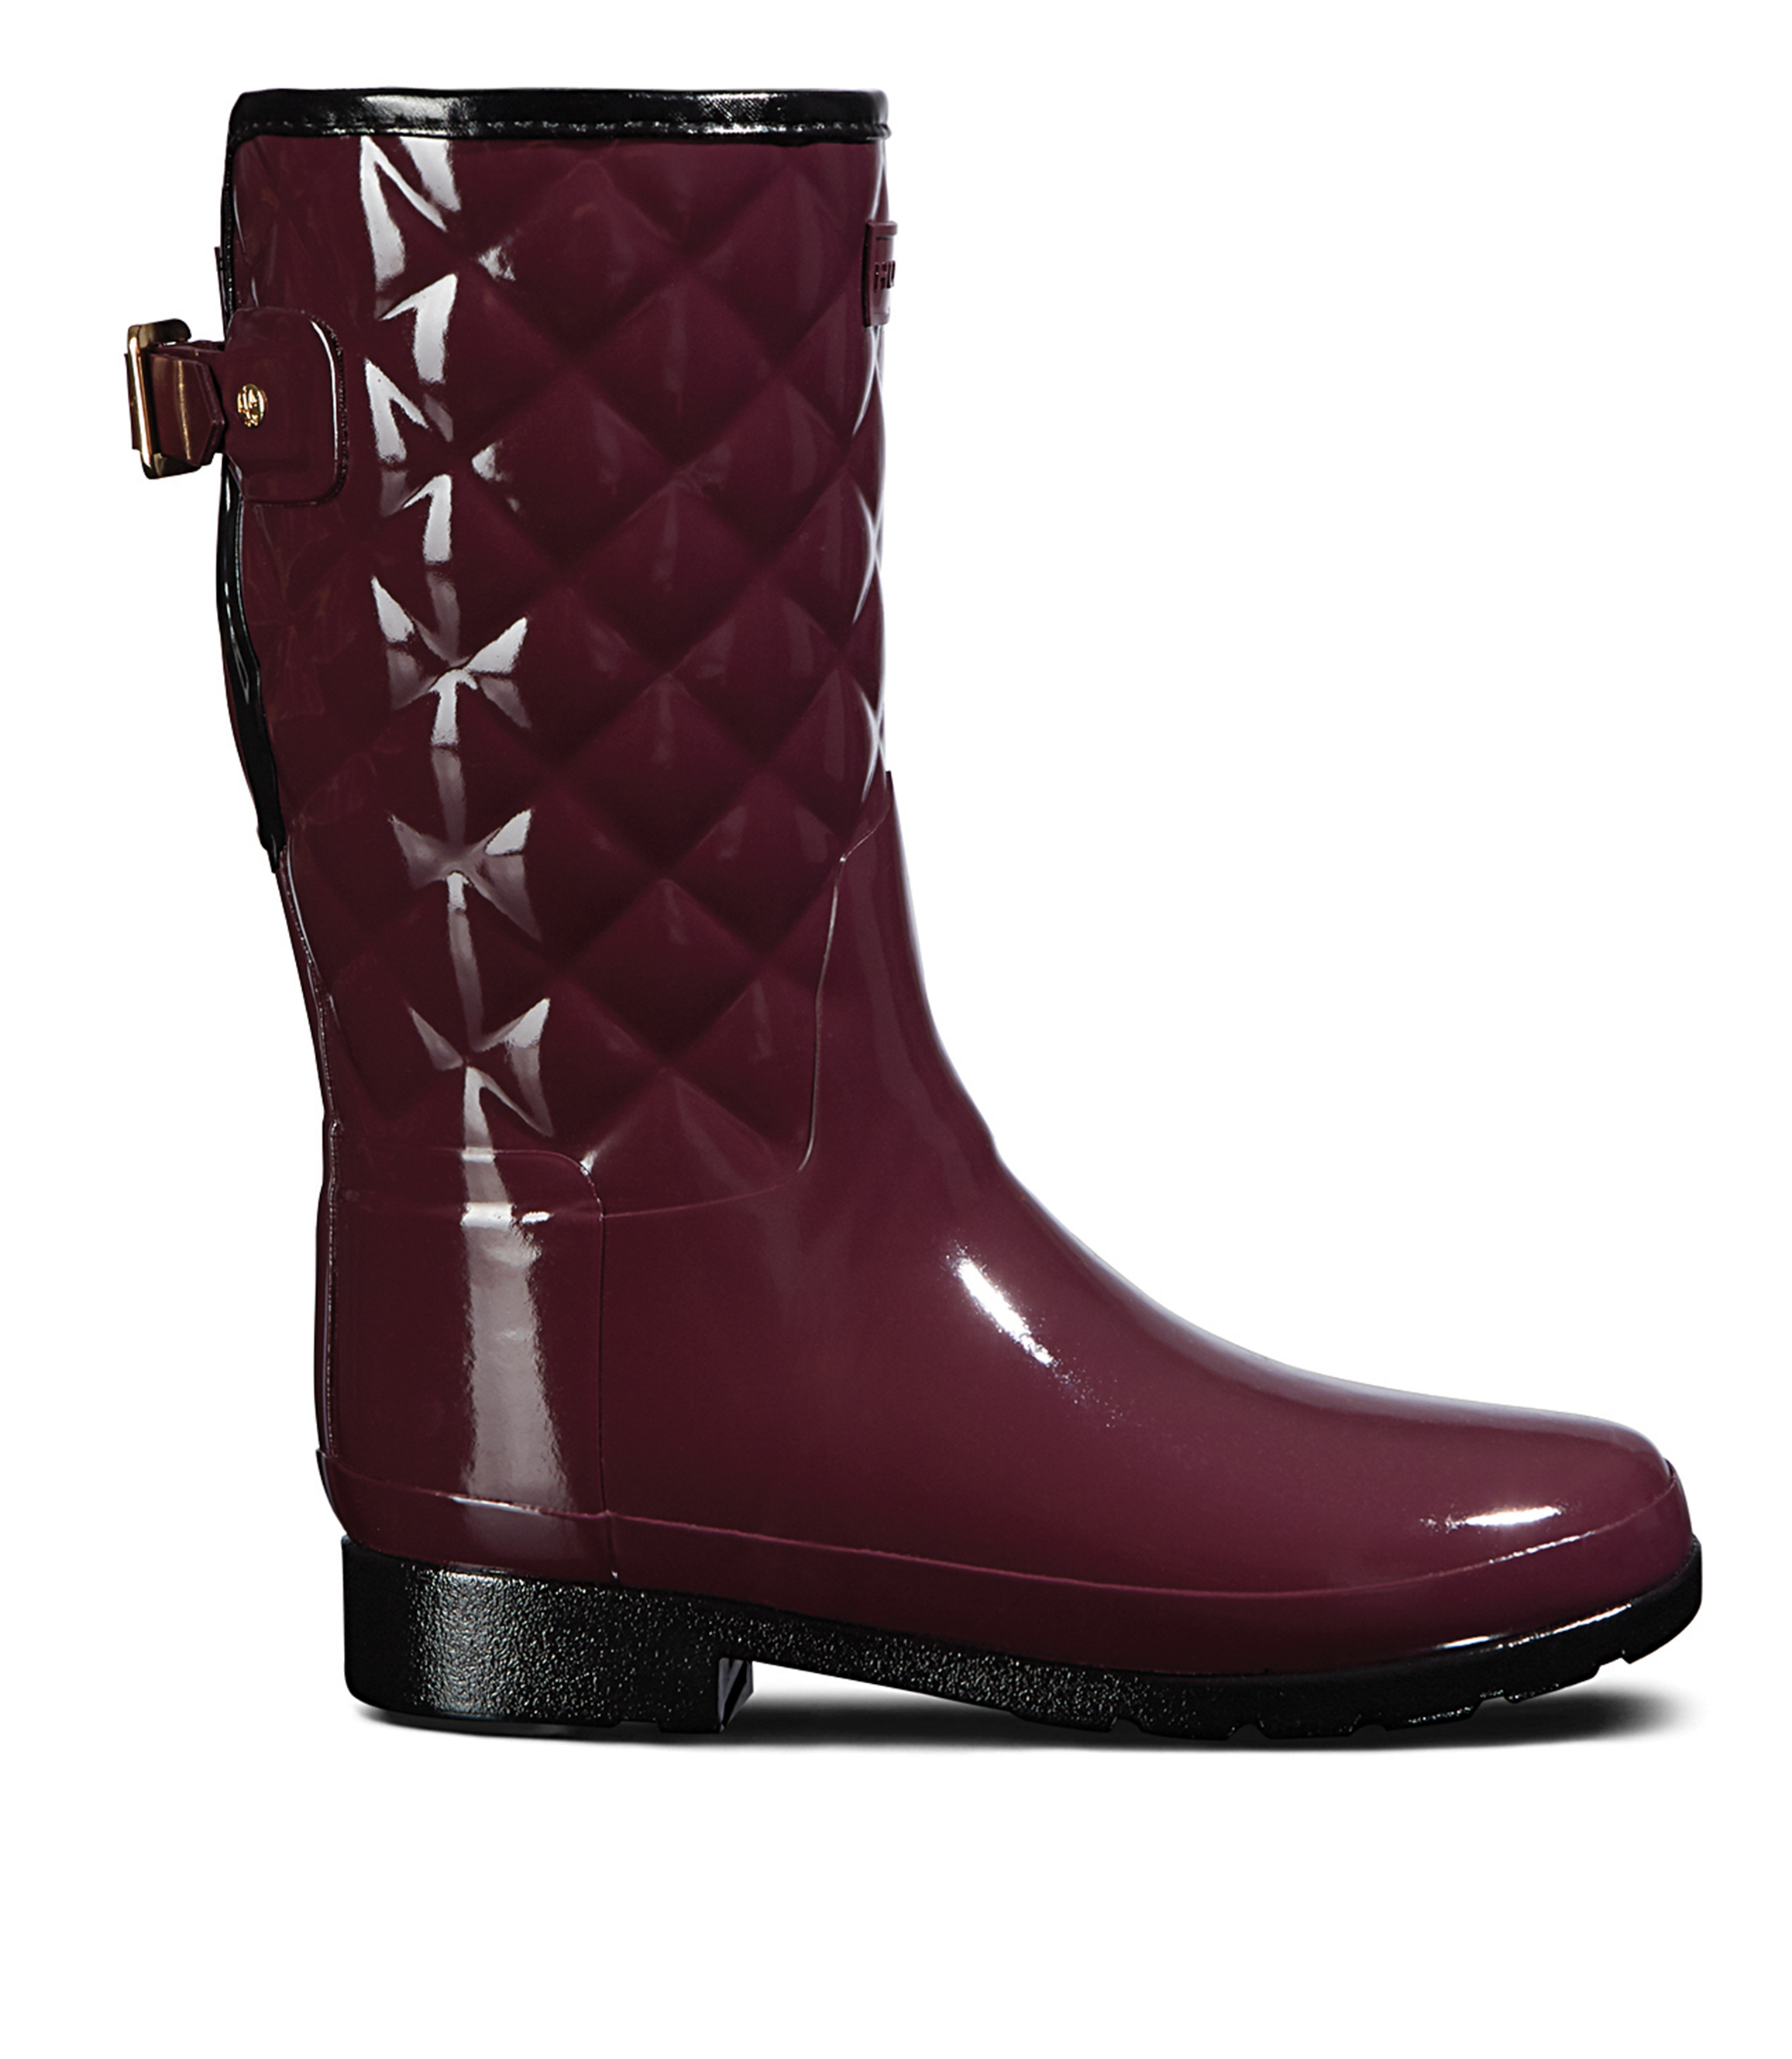 HUNTER BOOTS OXBLOOD REFINED GLOSS QUILT SHORT BOOT | Rosella - Style ...